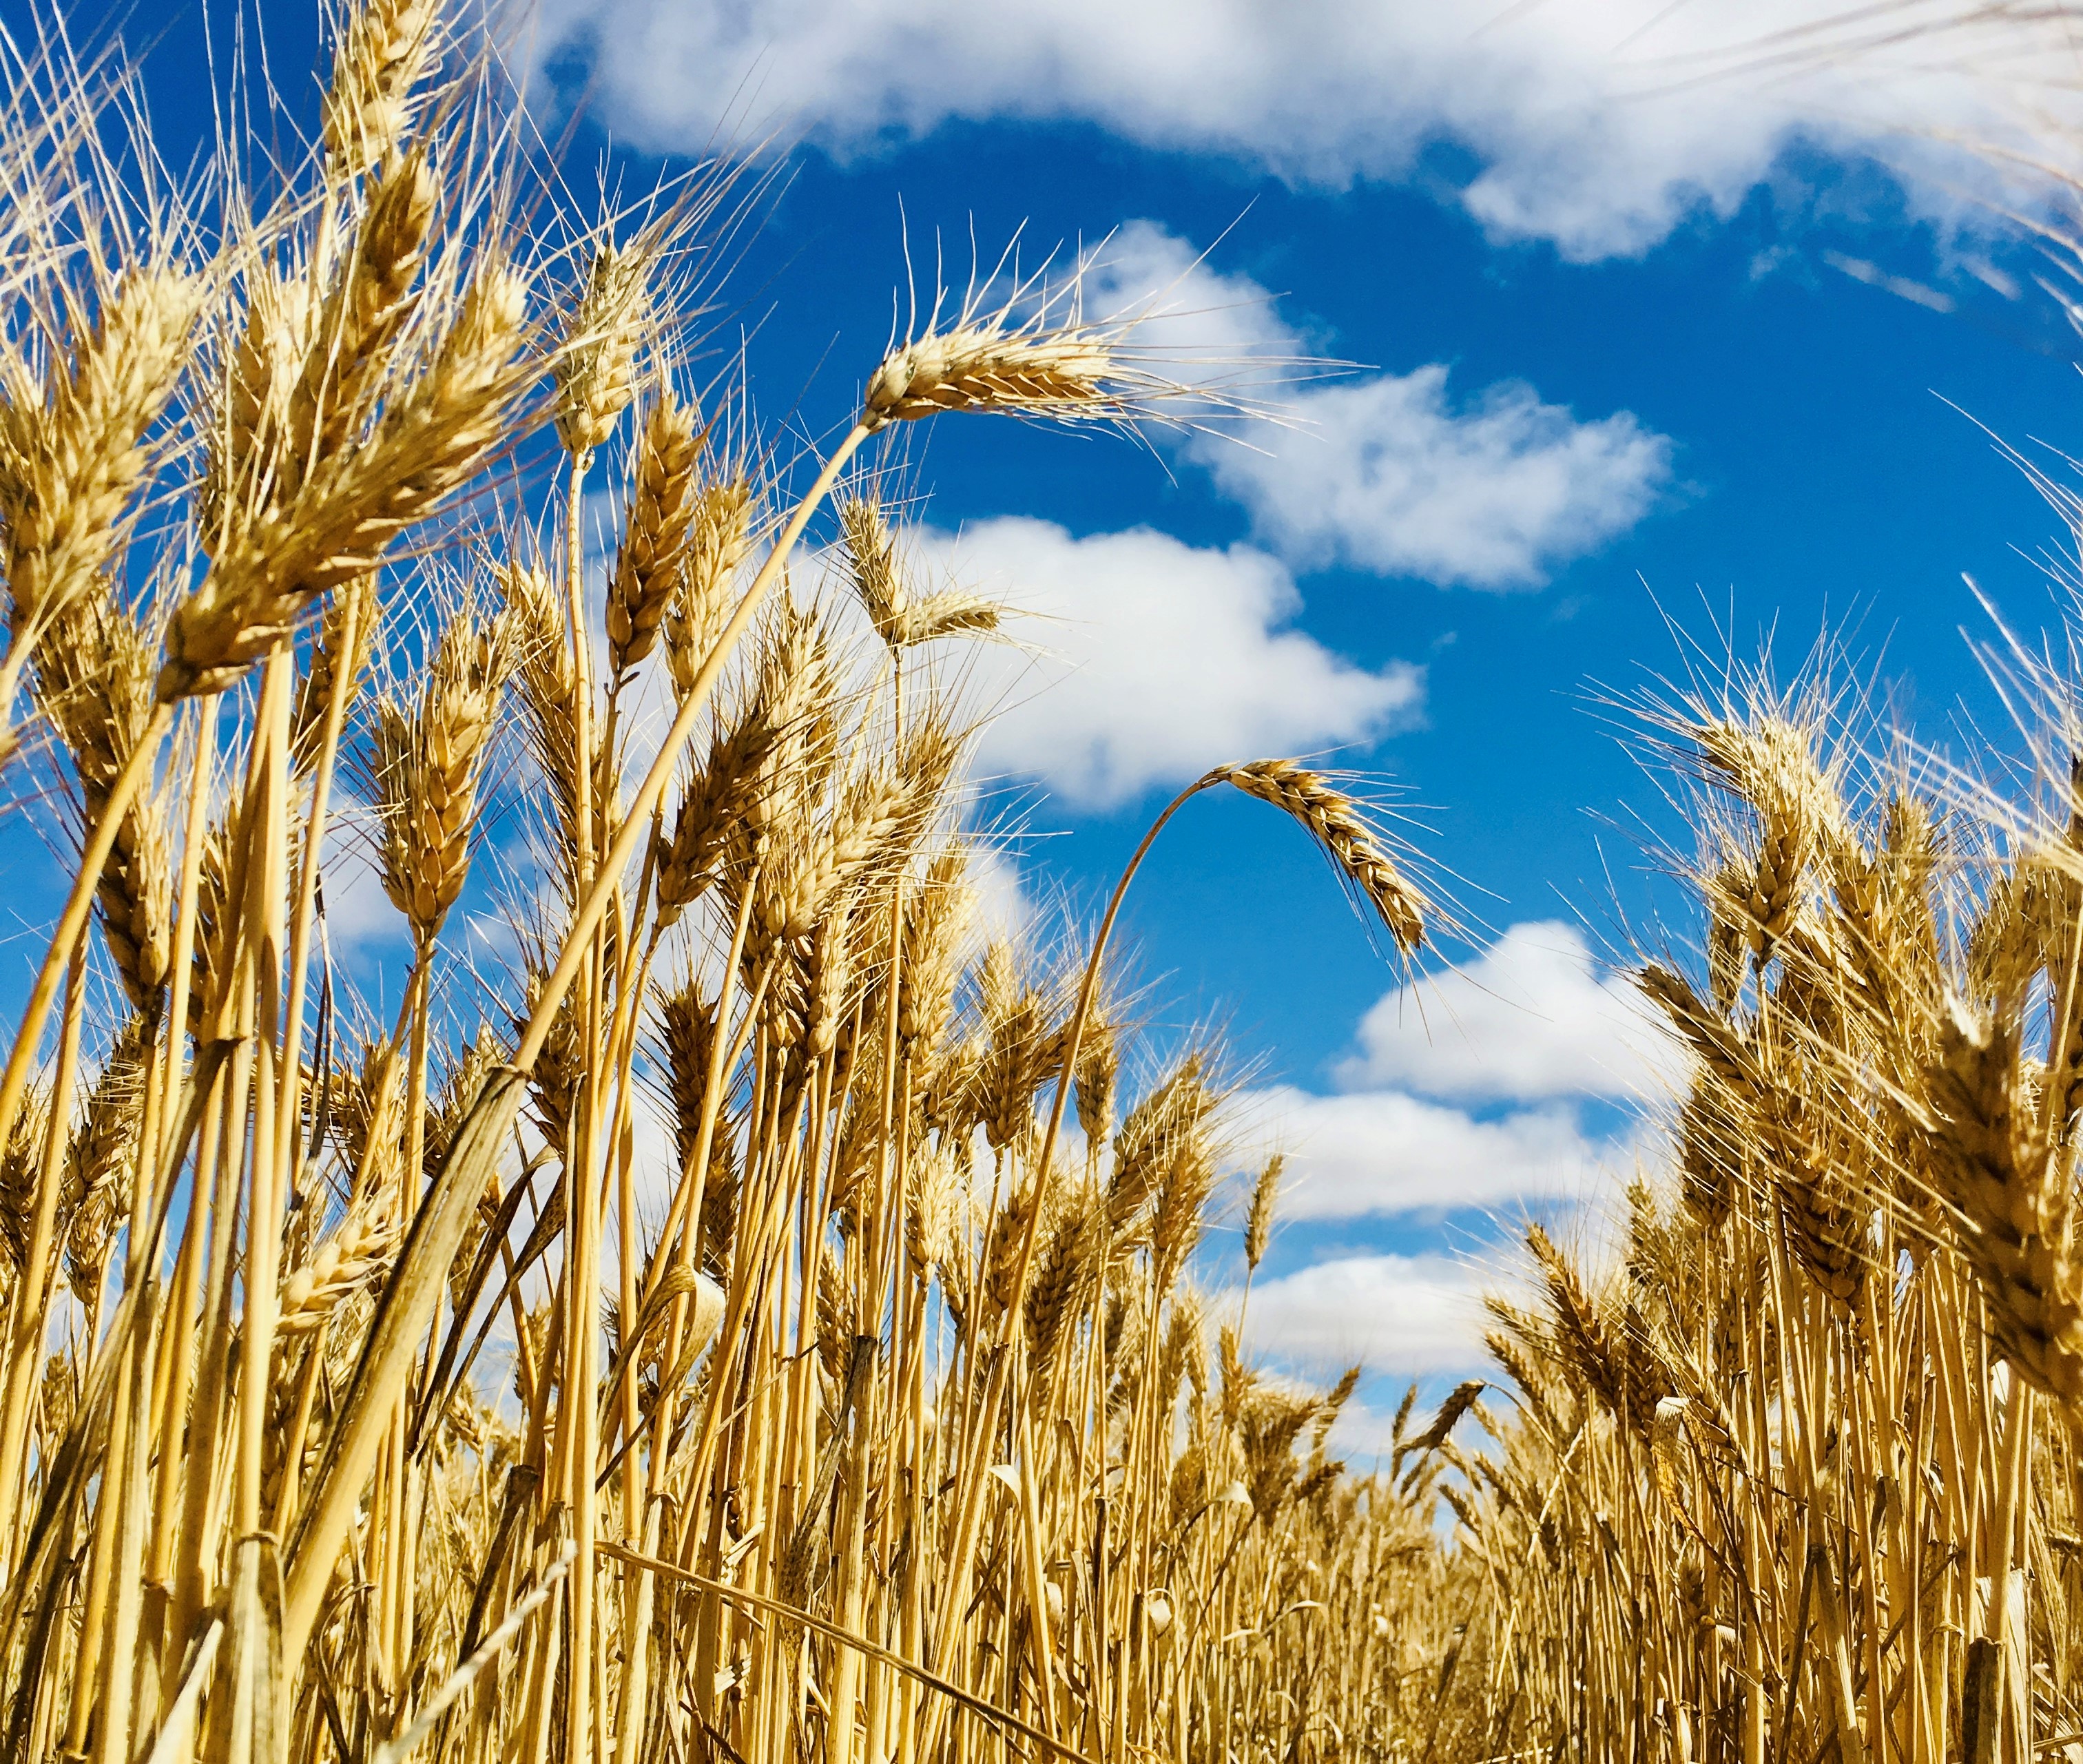 A ripe wheat crop with a blue sky and white clouds.